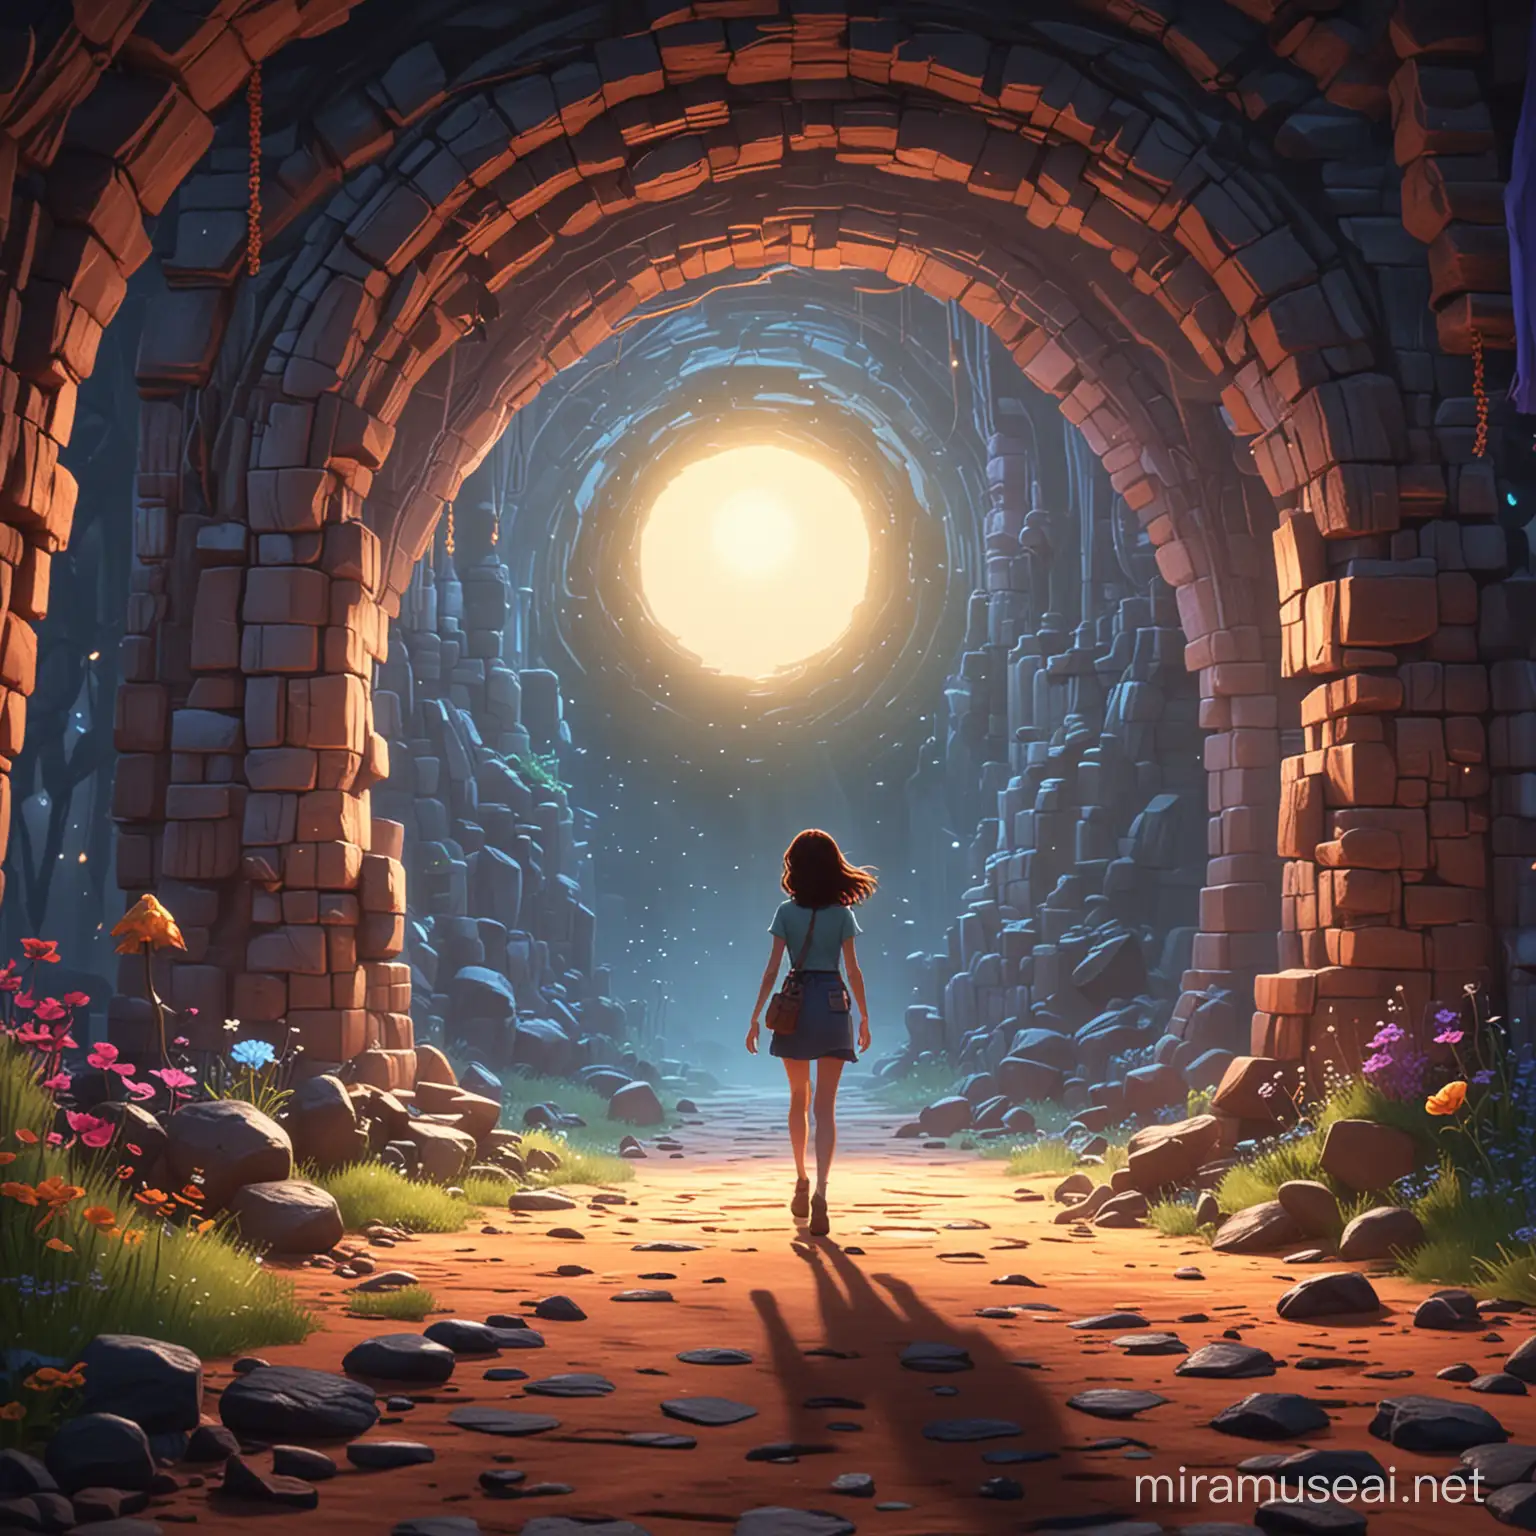 pixar animation style, young woman walking between worlds, magical portal, dream world,  shadow lands 